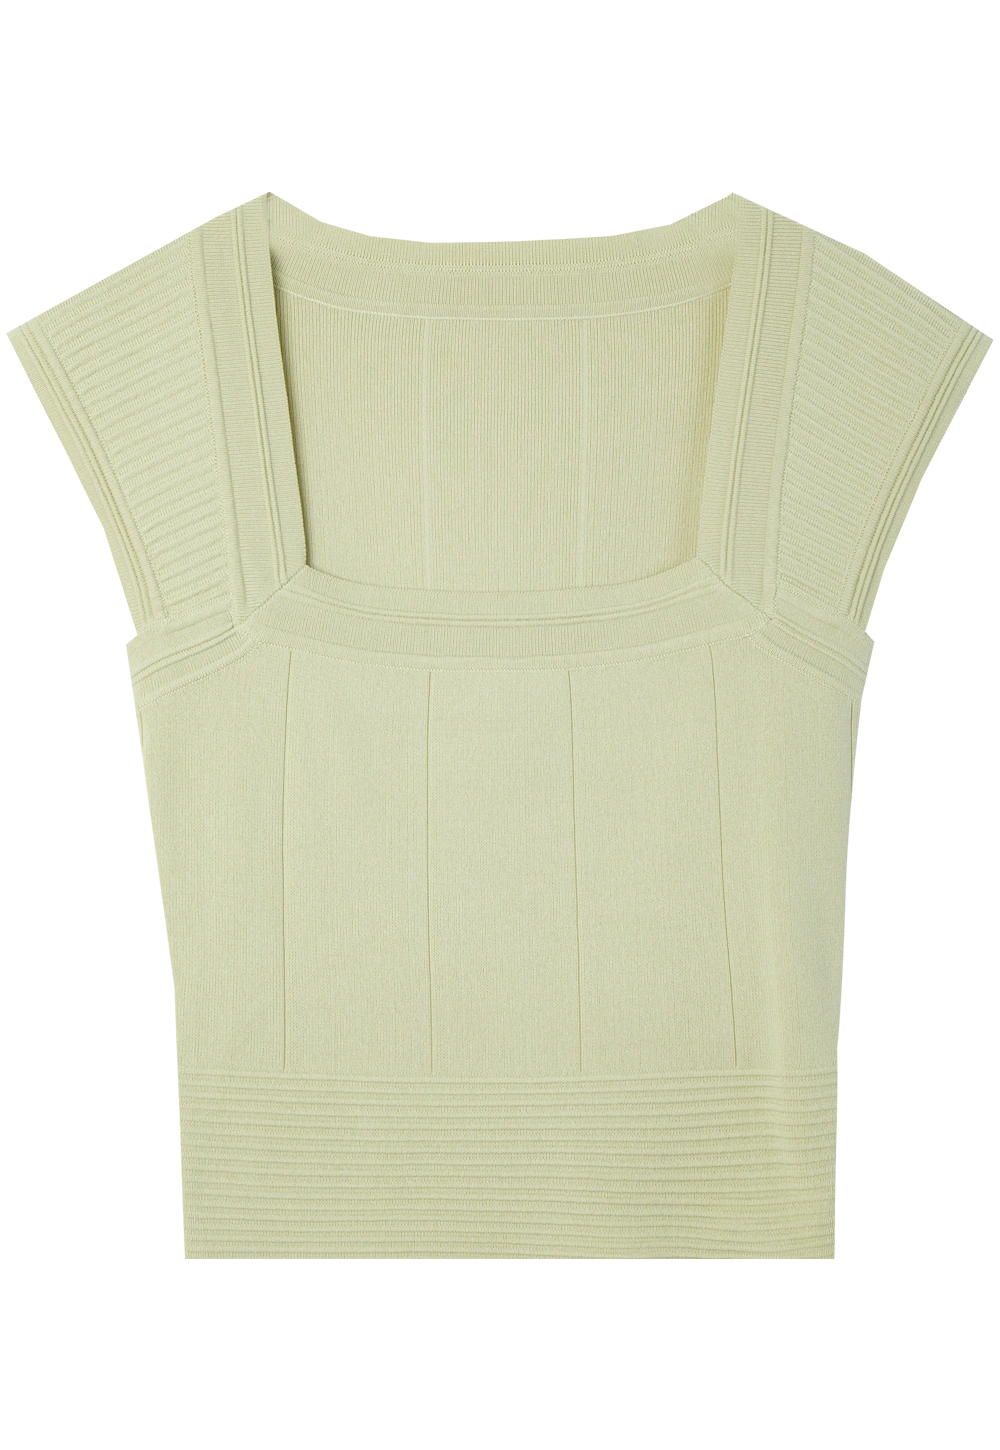 Women's Sleeveless Knit Top in Soft Yellow with Structured Design - Contemporary and Stylish